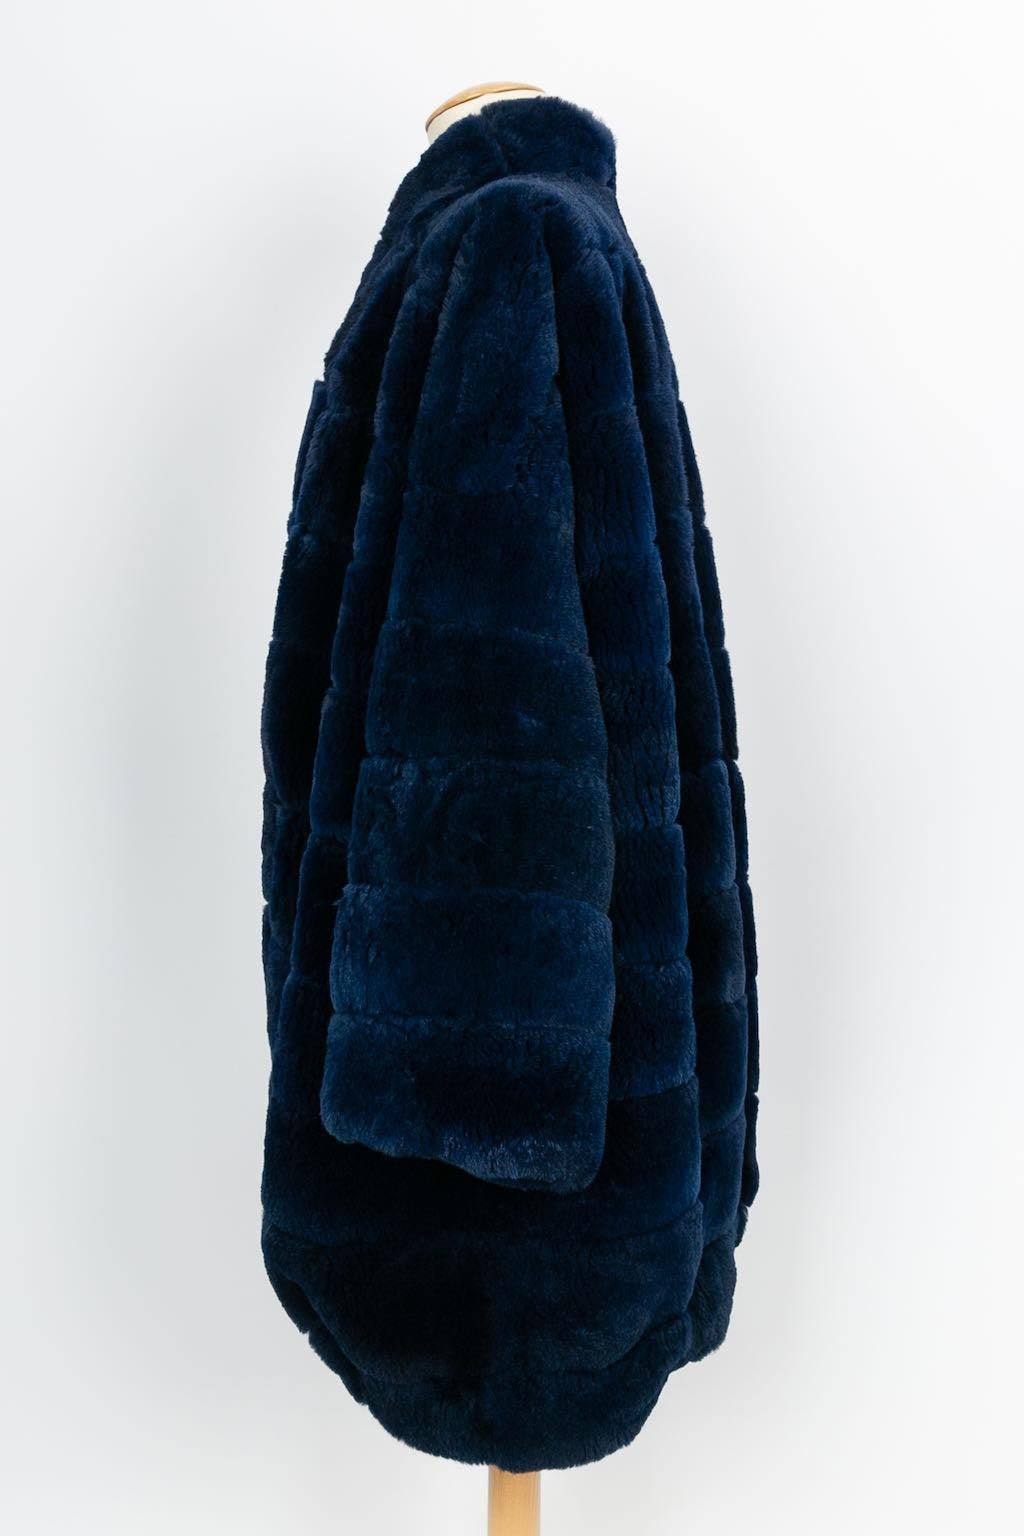 Dior -(Made in France) Blue fur coat. Black silk lining. No composition label or size indicated, it fits a 36FR/38FR.

Additional information: 
Dimensions: Shoulder width: 74 cm, Sleeve length: 44 cm, Length: 81 cm
Condition: Very good